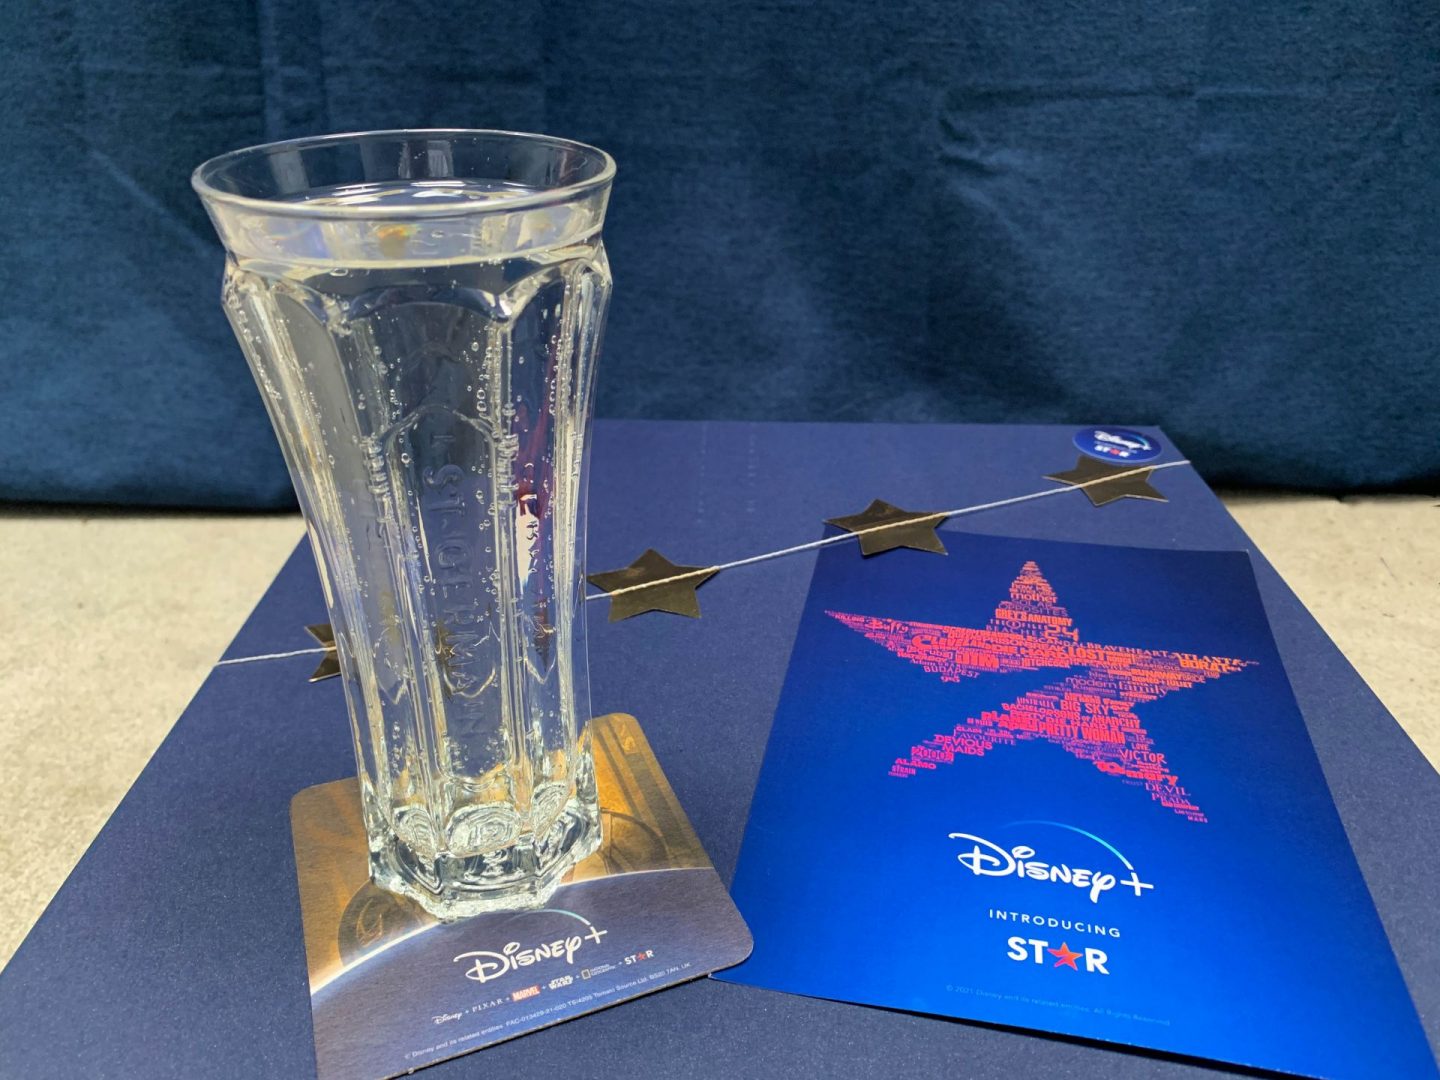 Disney+ and Star promo materials